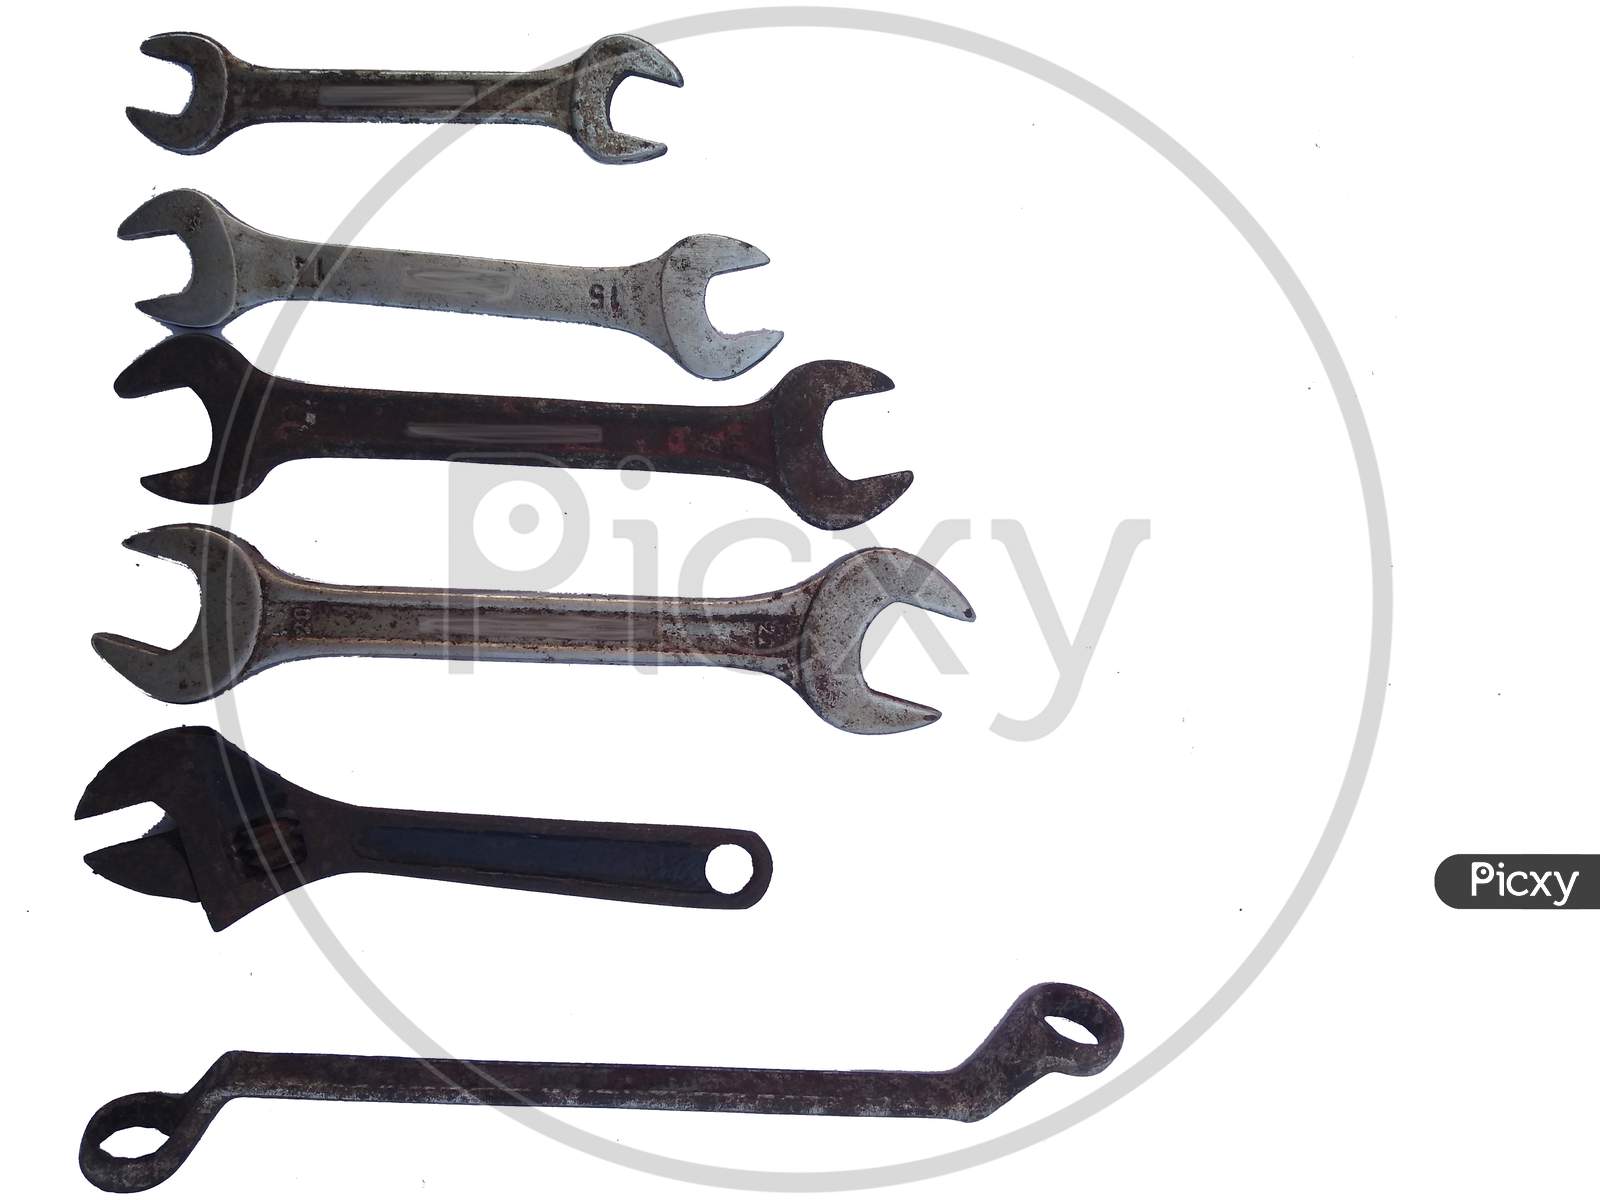 Various Types Of Wrench And Adjustable Wrench Isolated On White Background.